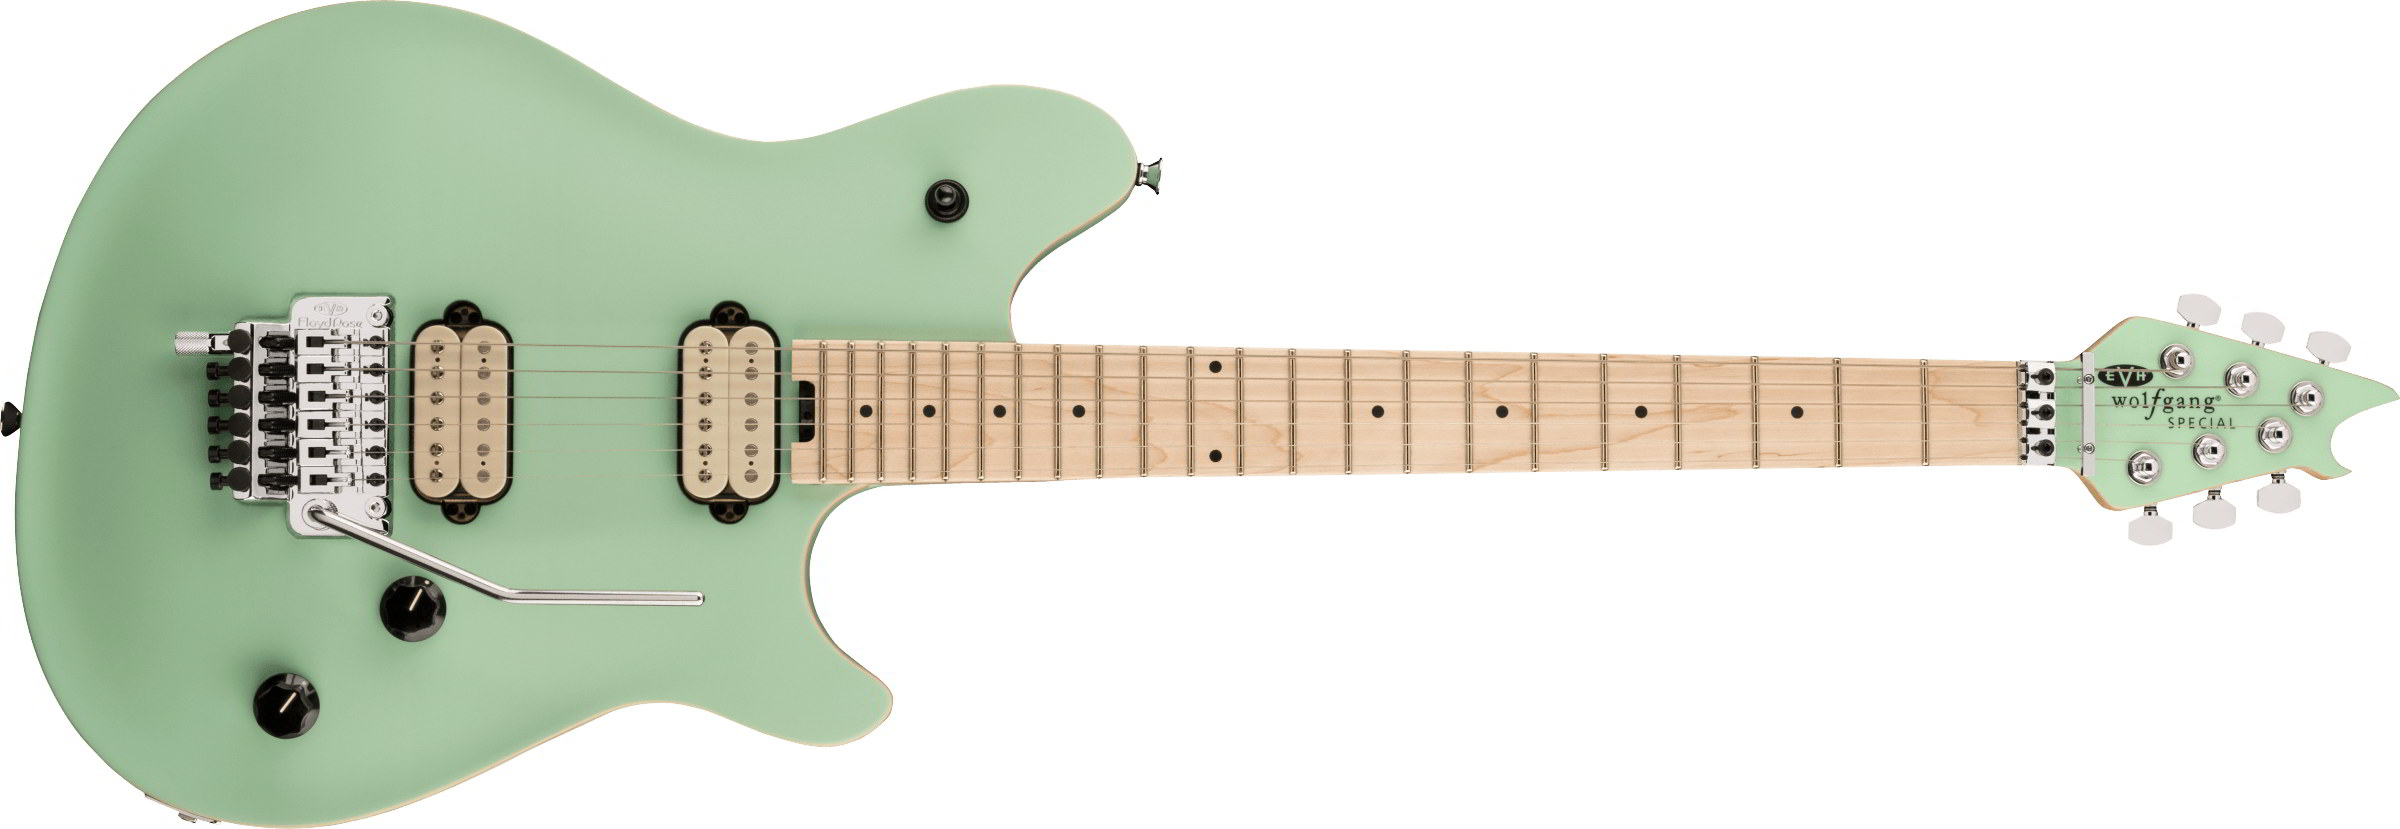 EVH Wolfgang Specialシリーズ エレキギターWolfgangreg; Special, Maple Fingerboard, Satin  Surf Green新品在庫状況をご確認ください | MUSIC PLANT WEBSHOP